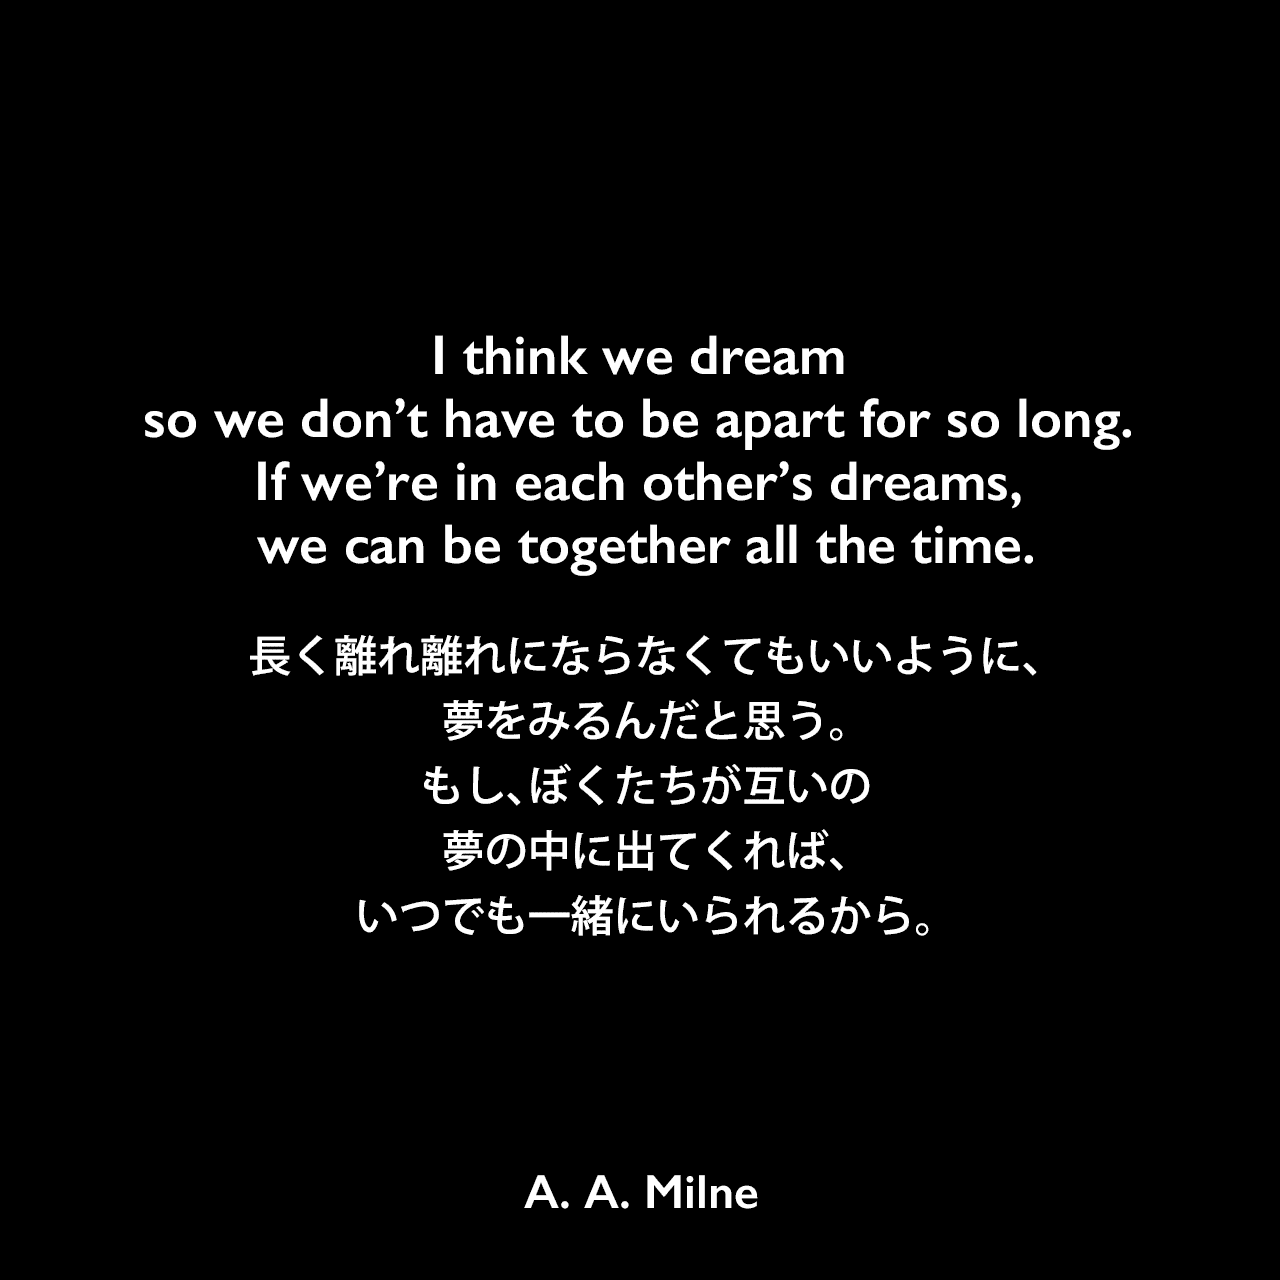 I think we dream so we don’t have to be apart for so long. If we’re in each other’s dreams, we can be together all the time.長く離れ離れにならなくてもいいように、夢をみるんだと思う。もし、ぼくたちが互いの夢の中に出てくれば、いつでも一緒にいられるから。A. A. Milne